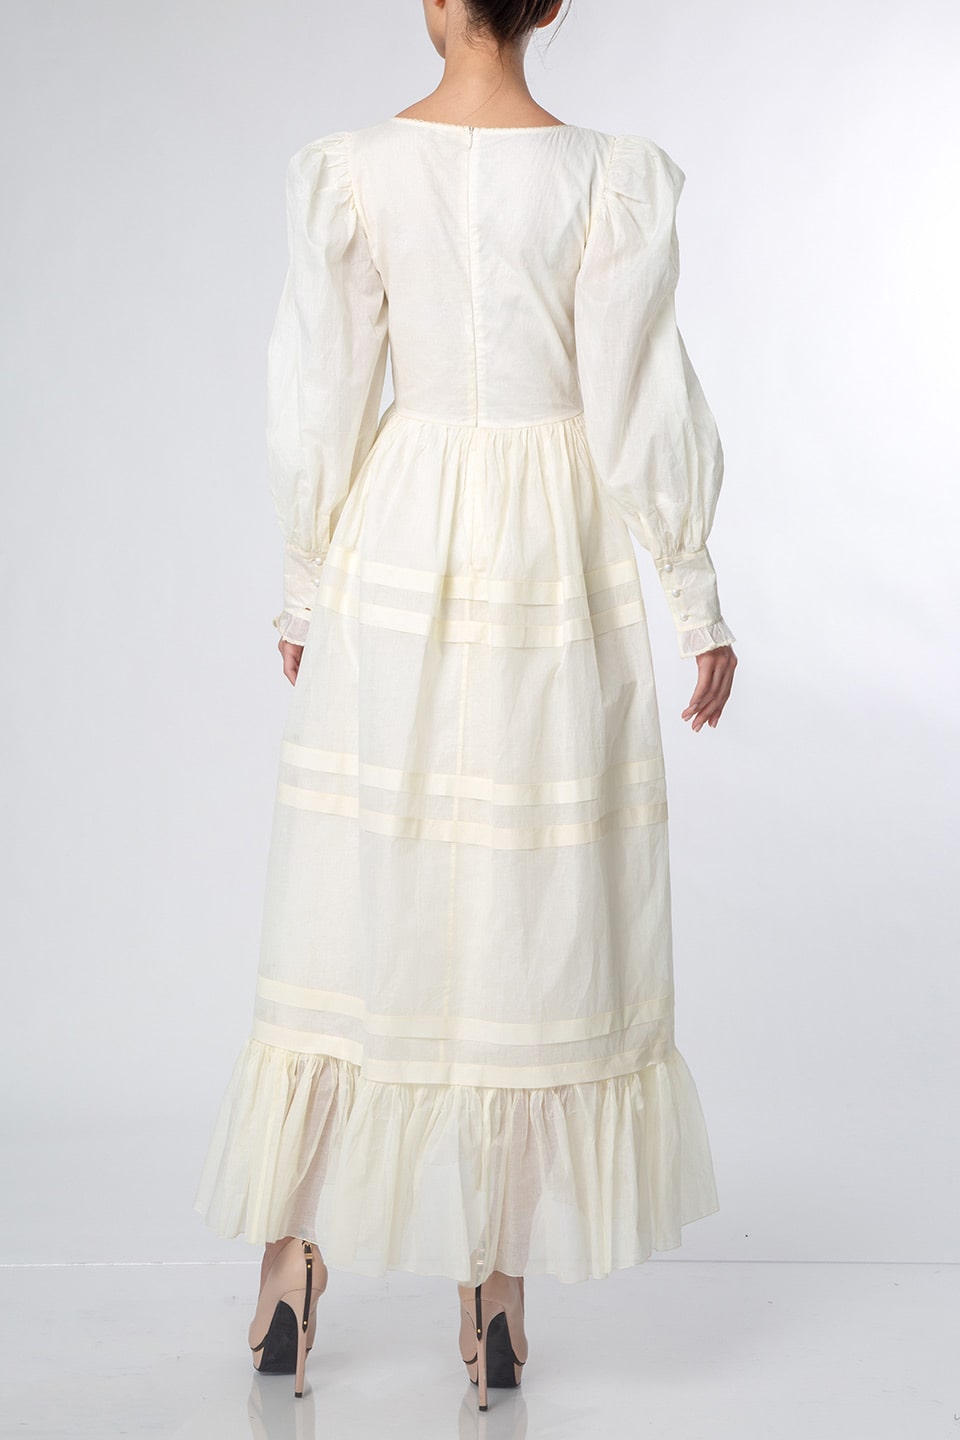 Thumbnail for Product gallery 2, Manoush religeuse long dress chantilly back